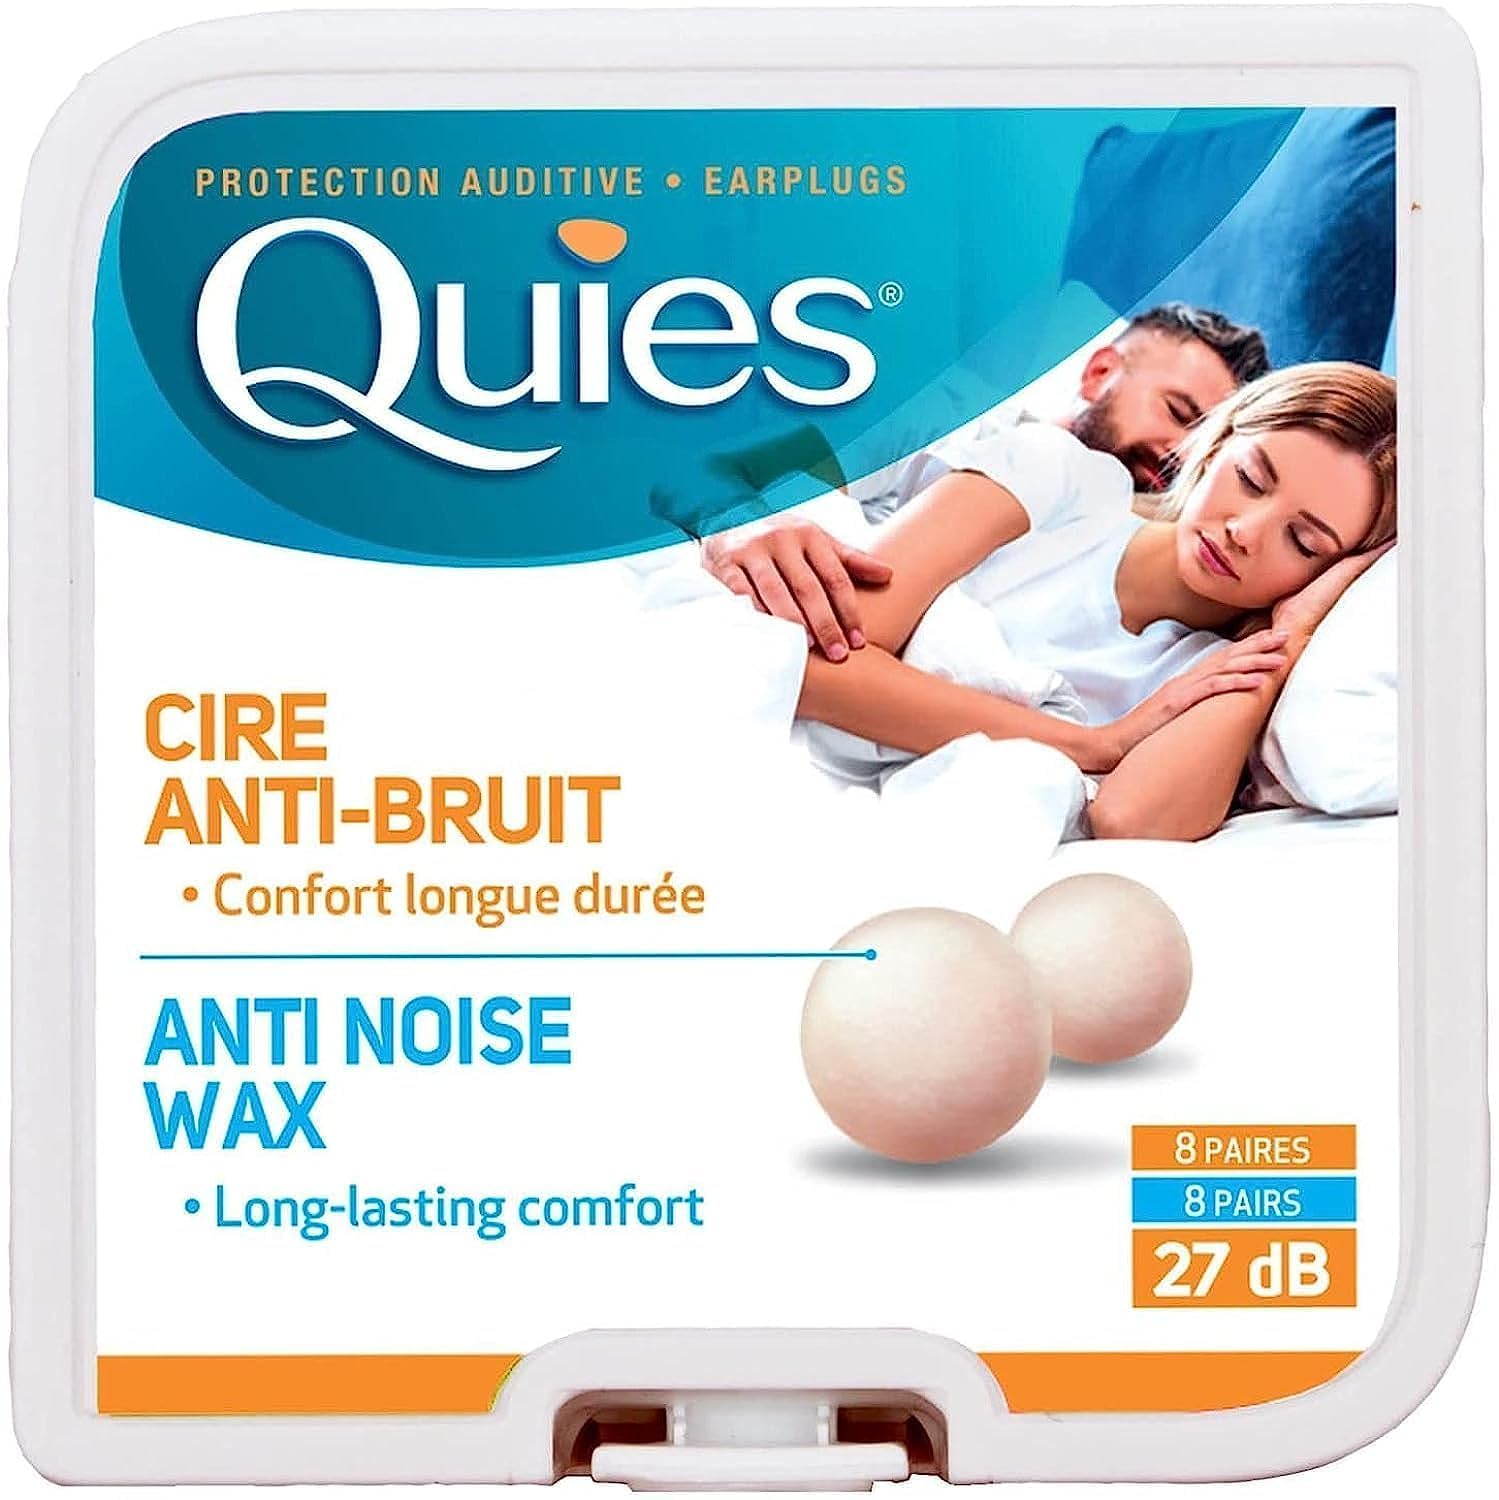 caswell-Massey Boules Quies Ear Plugs - Natural Beeswax and cotton Plugs for Swimming, Sleeping - Disposable, Reusable - 8 Pairs